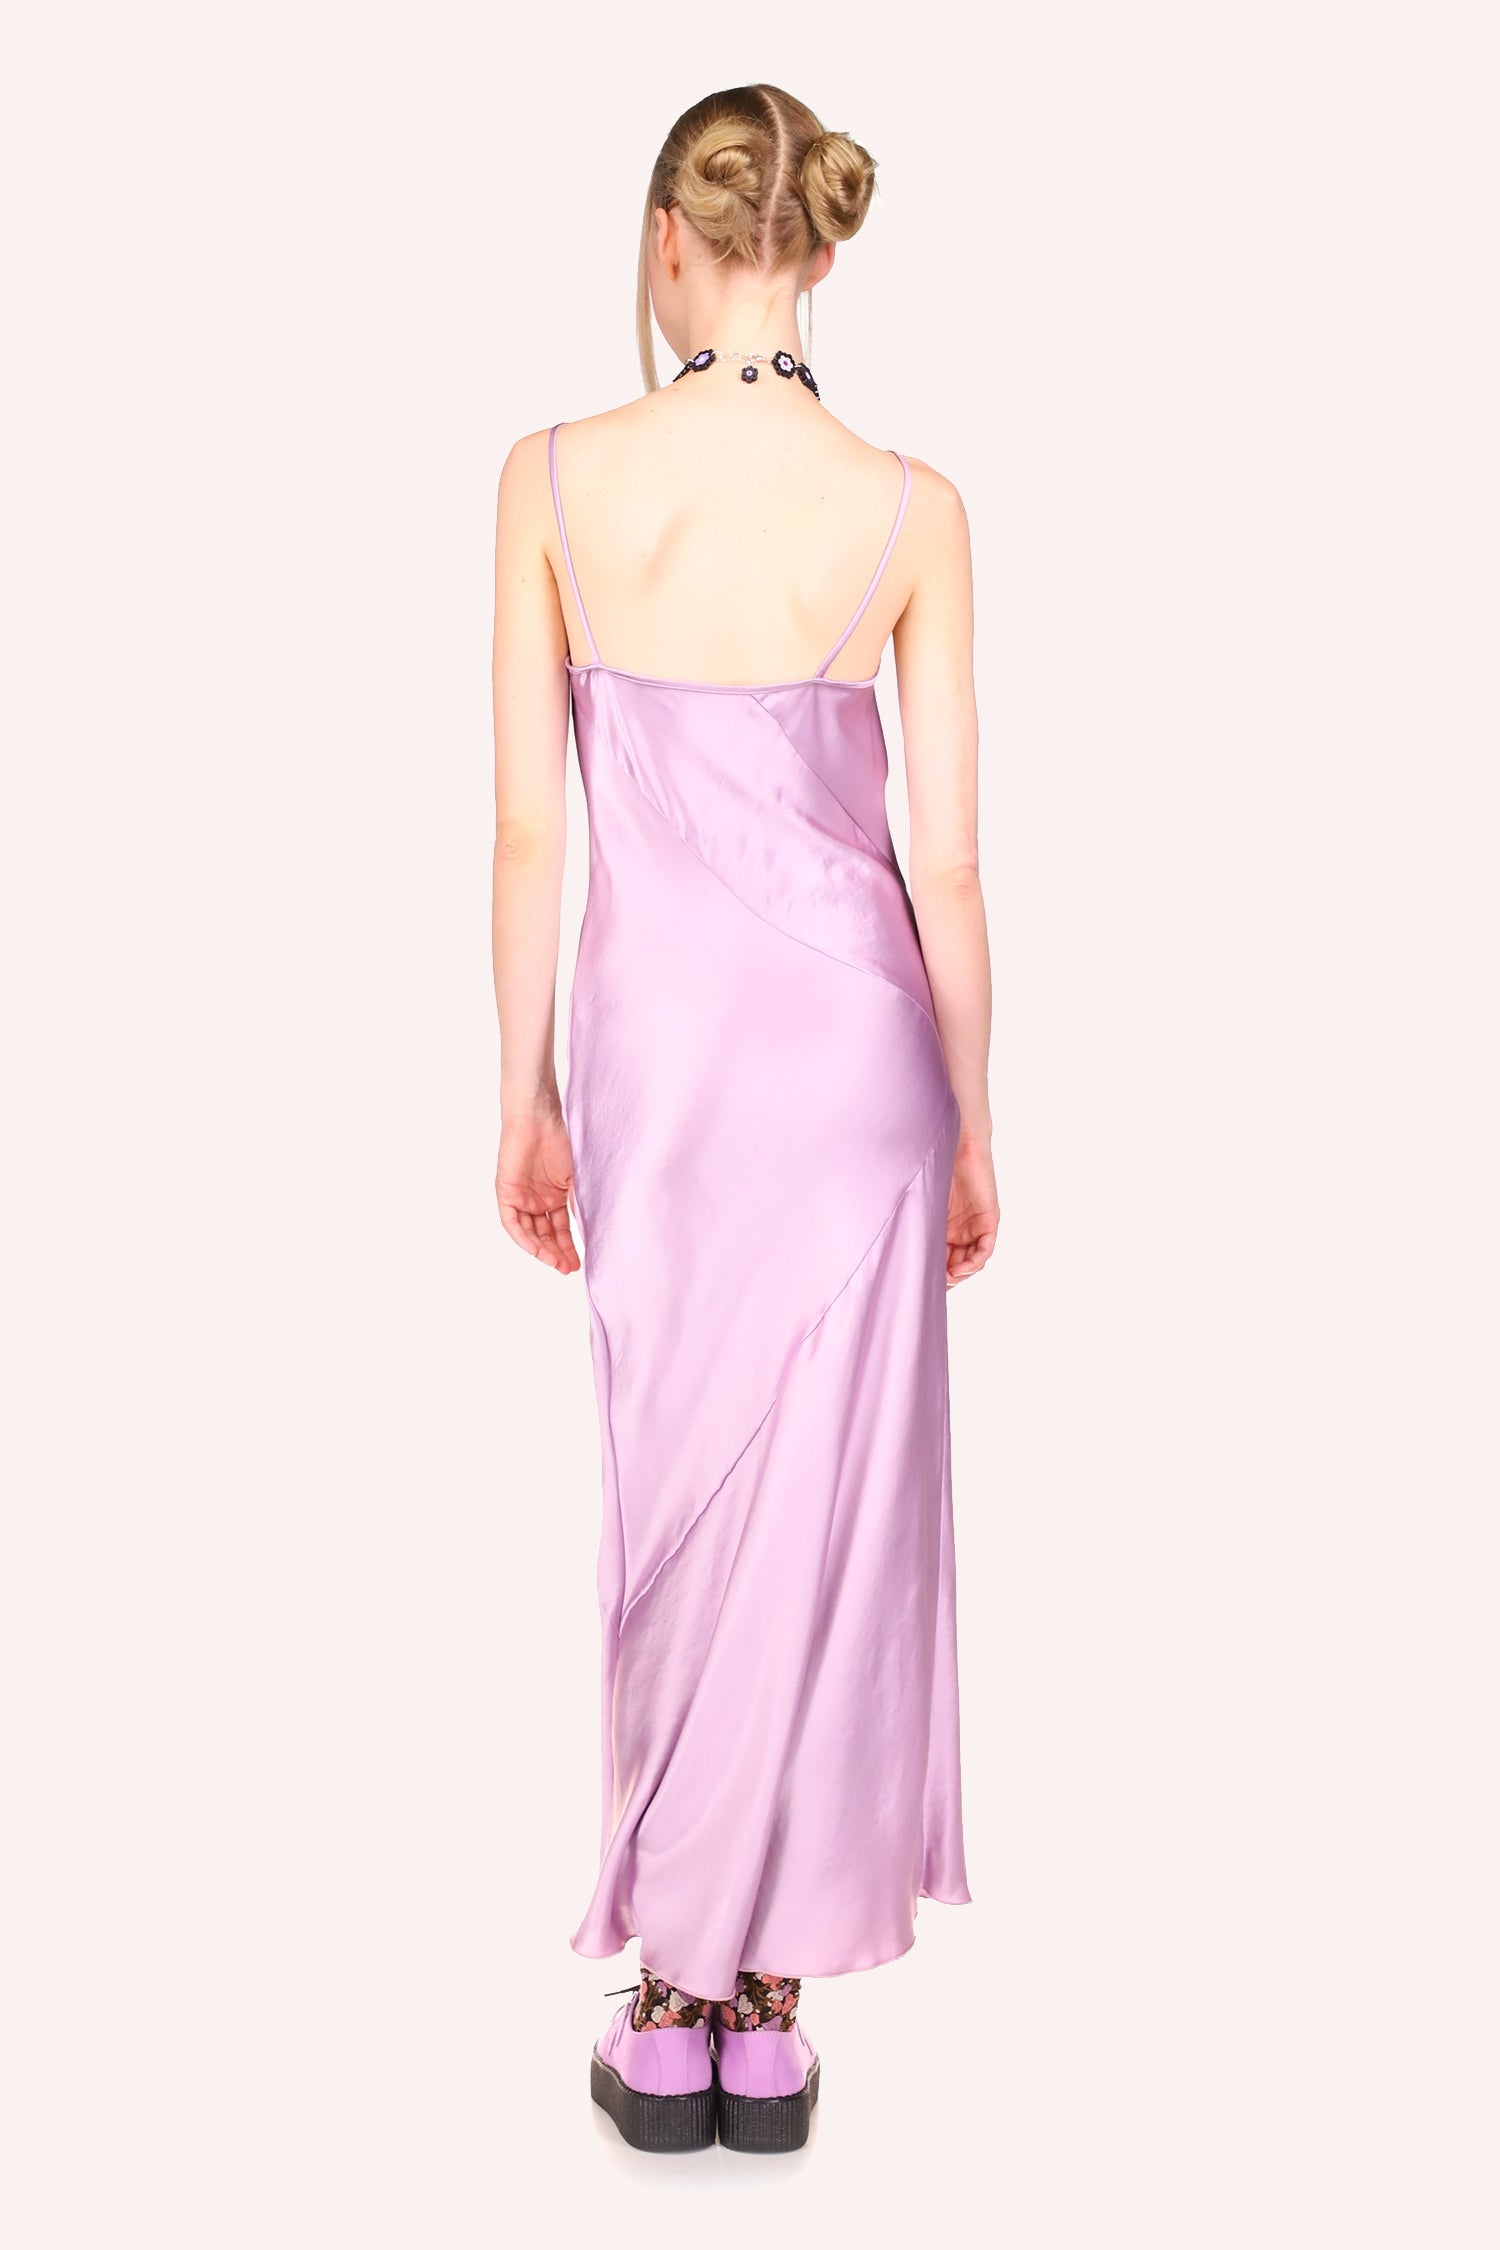 Washed Satin Slip Dress lavender, round collar cut front and back, two diagonal stripes from left to right